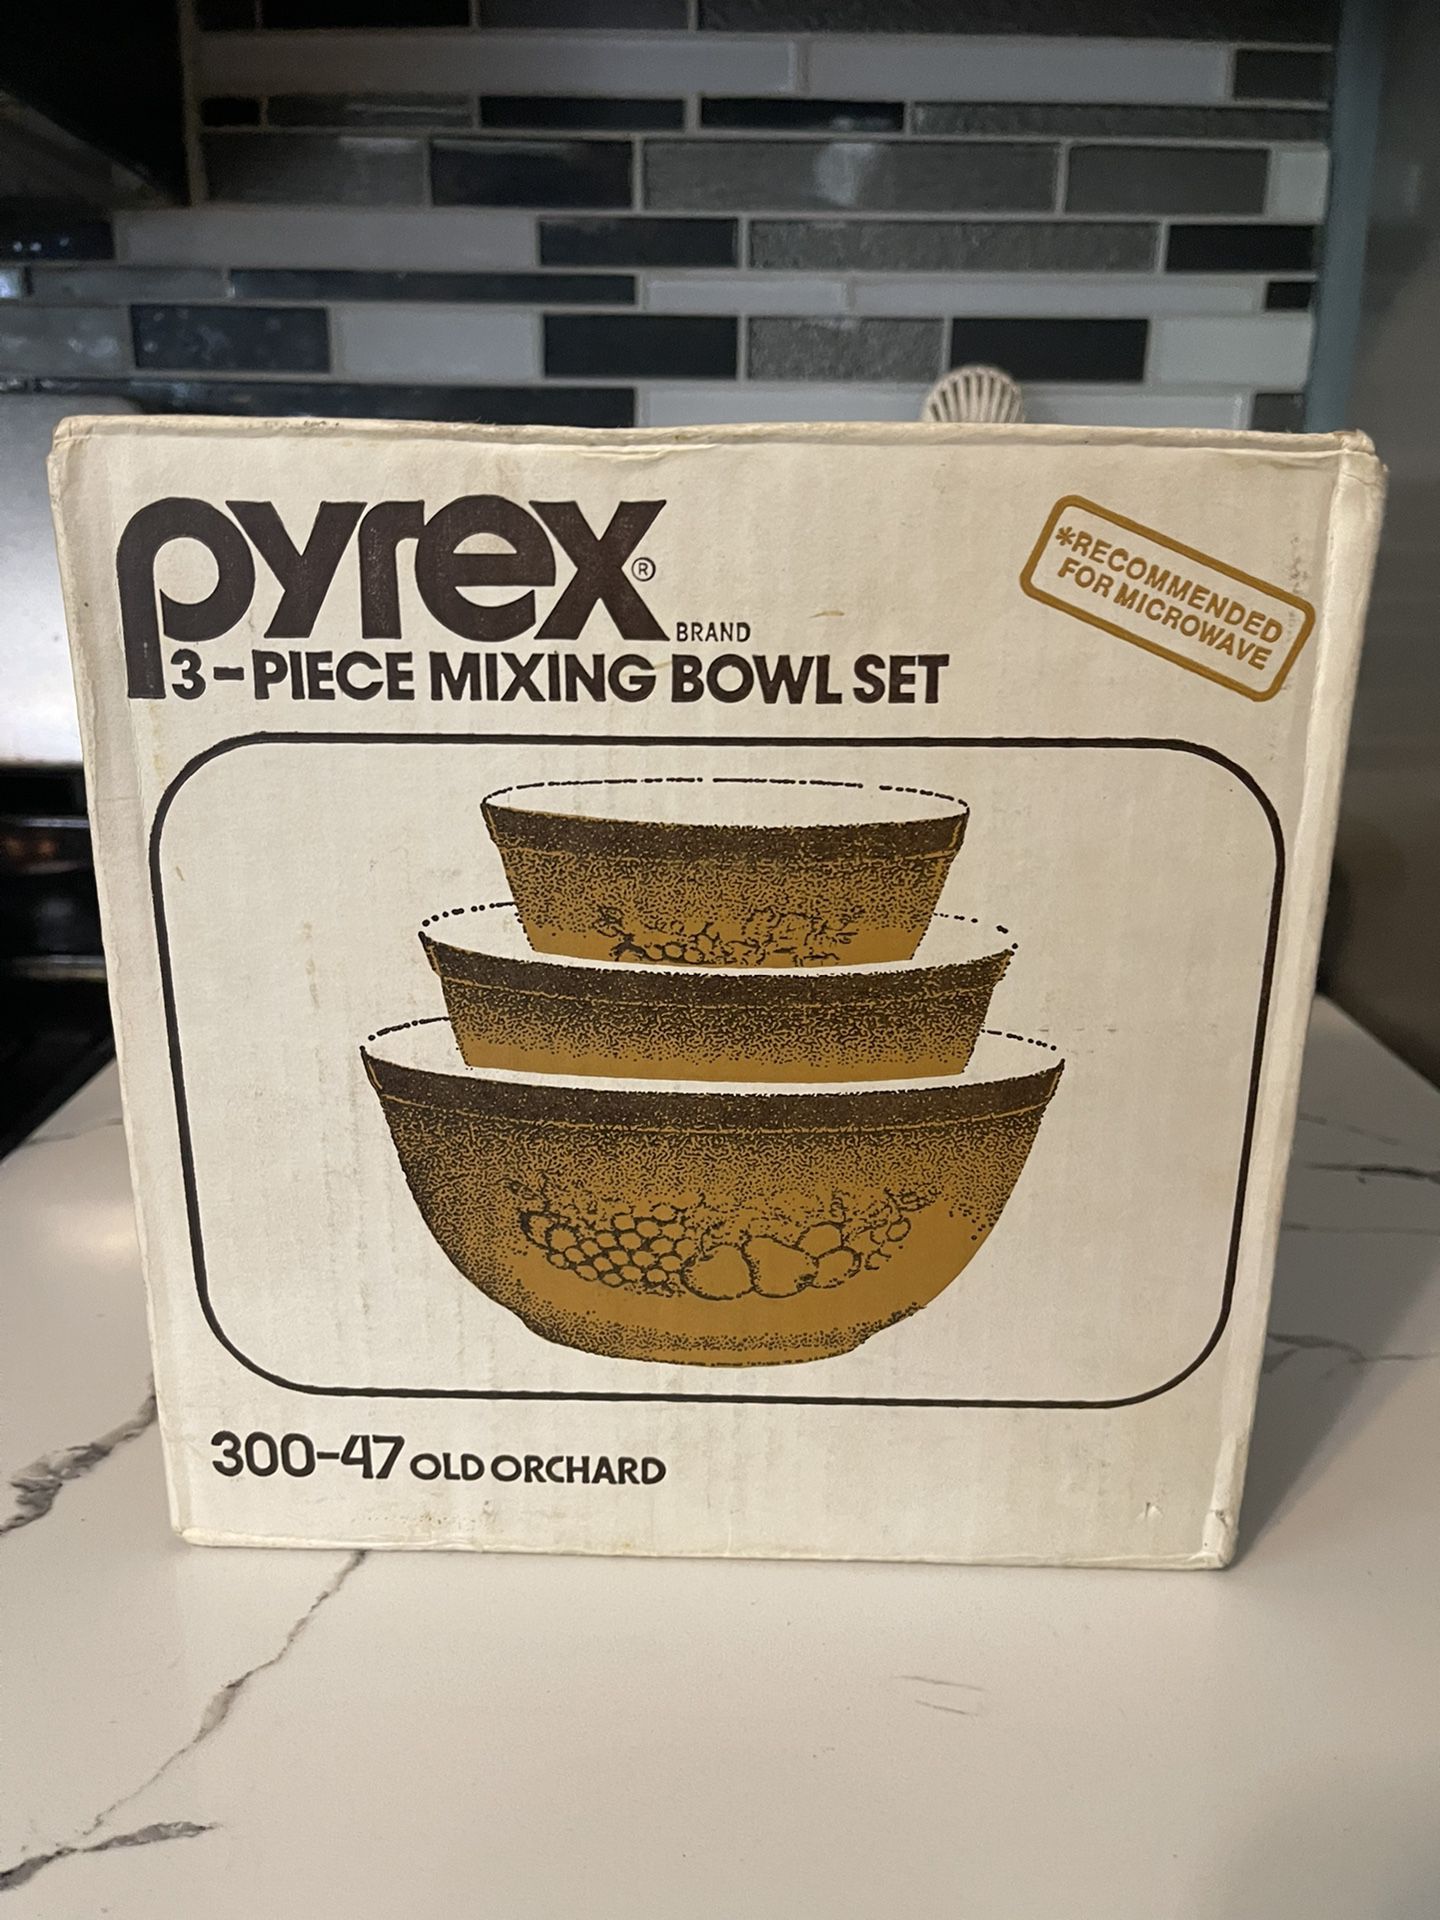 Vintage Pyrex 300-47 Old Orchard 3 pc Mixing Bowl New in Sealed Box Corning Ware